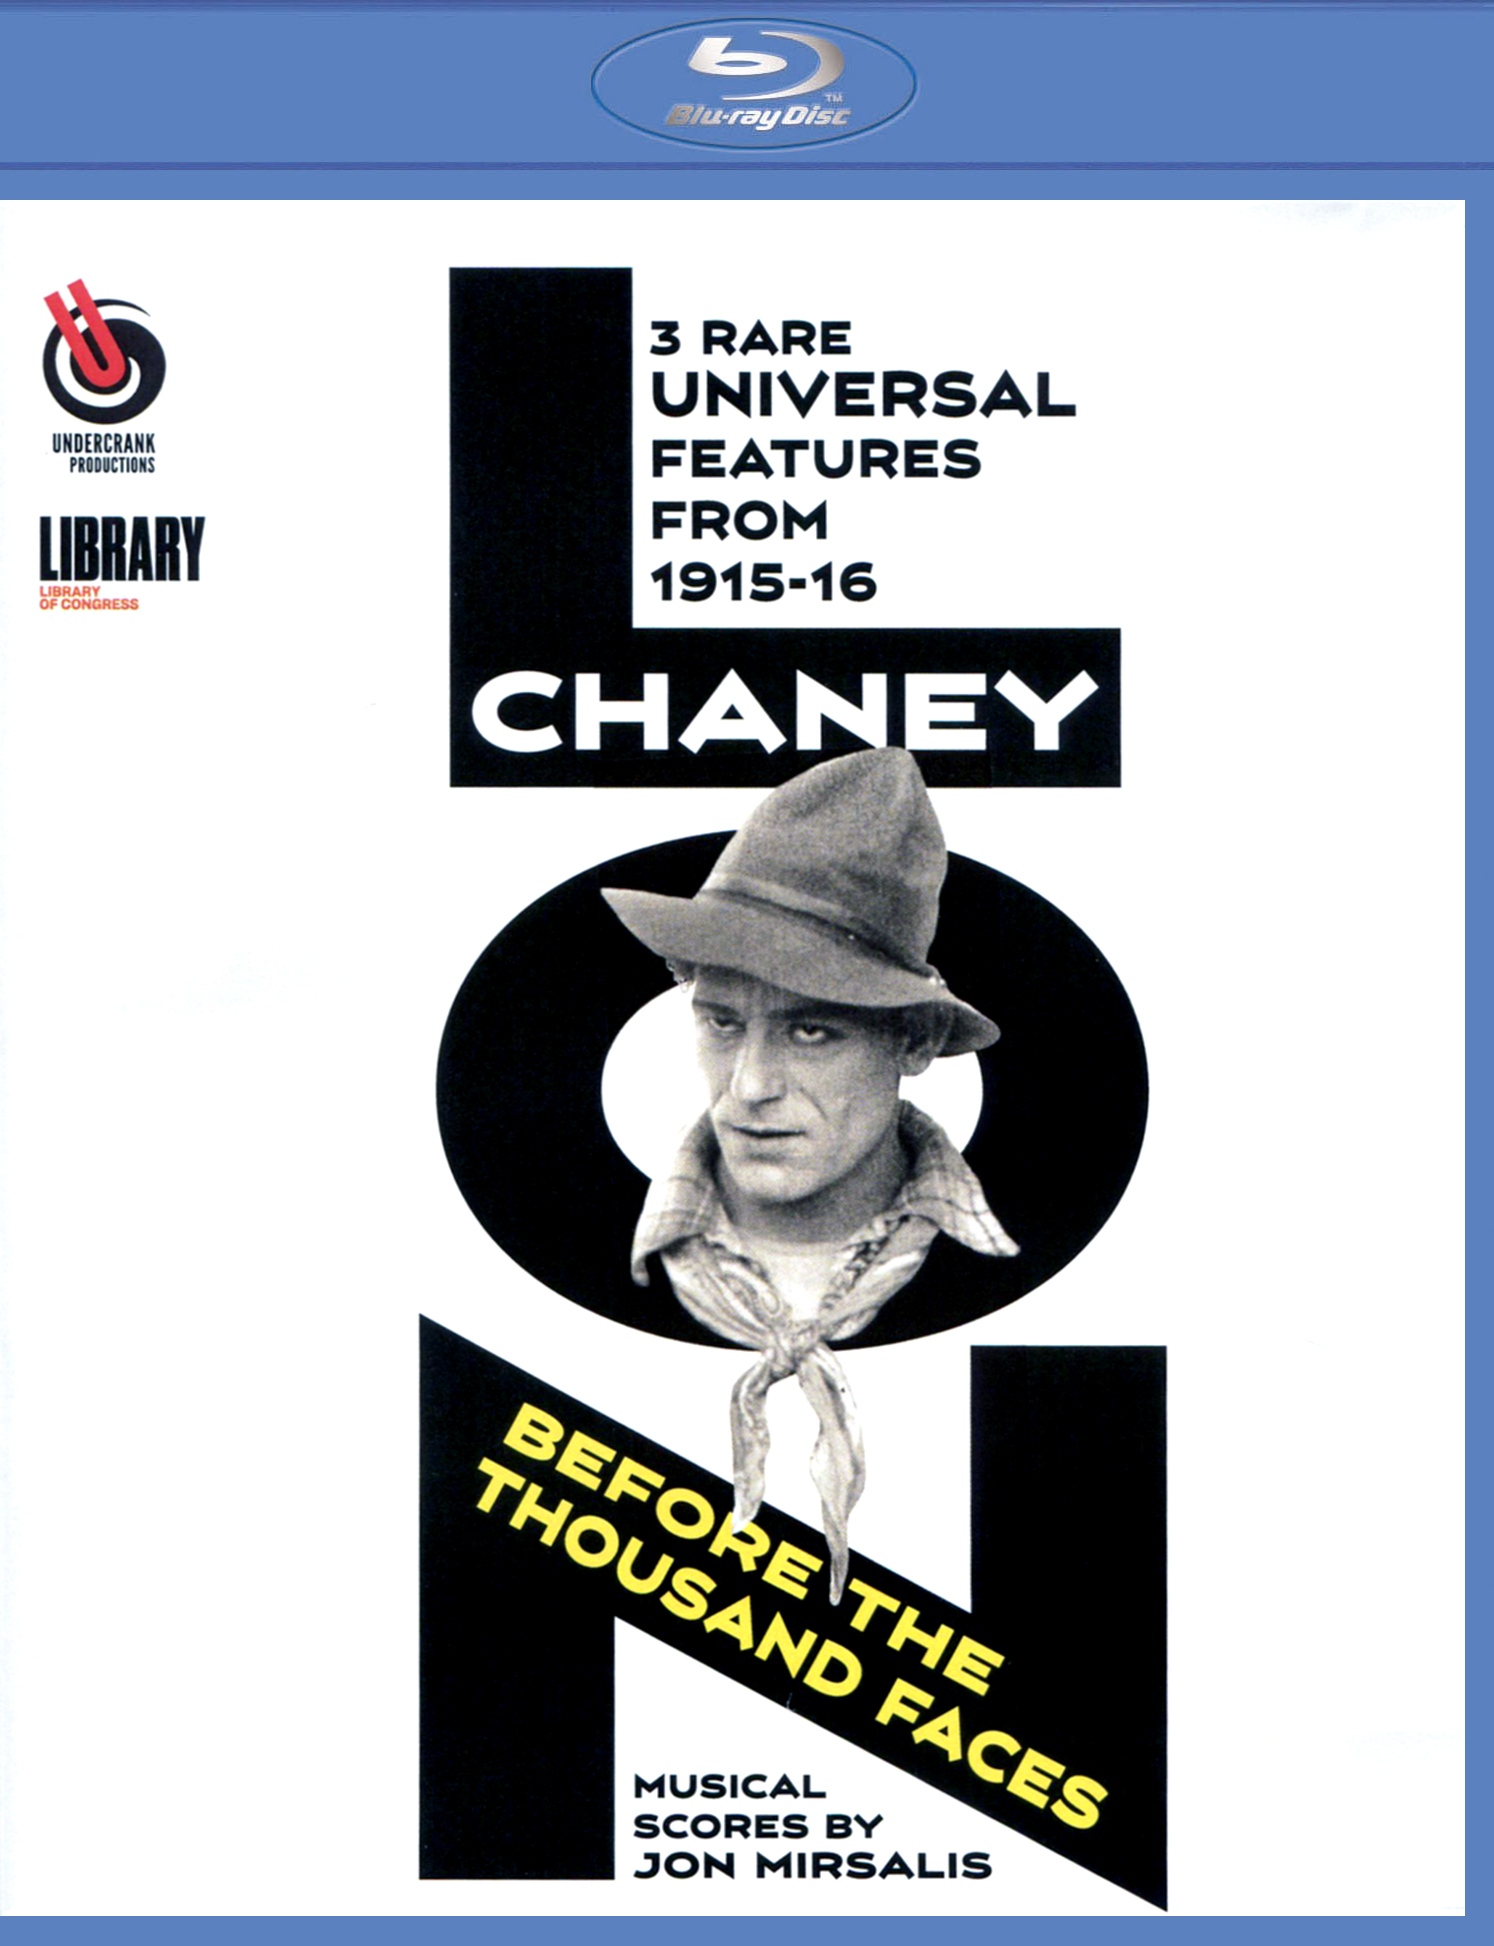 Lon Chaney – Fists and .45s!